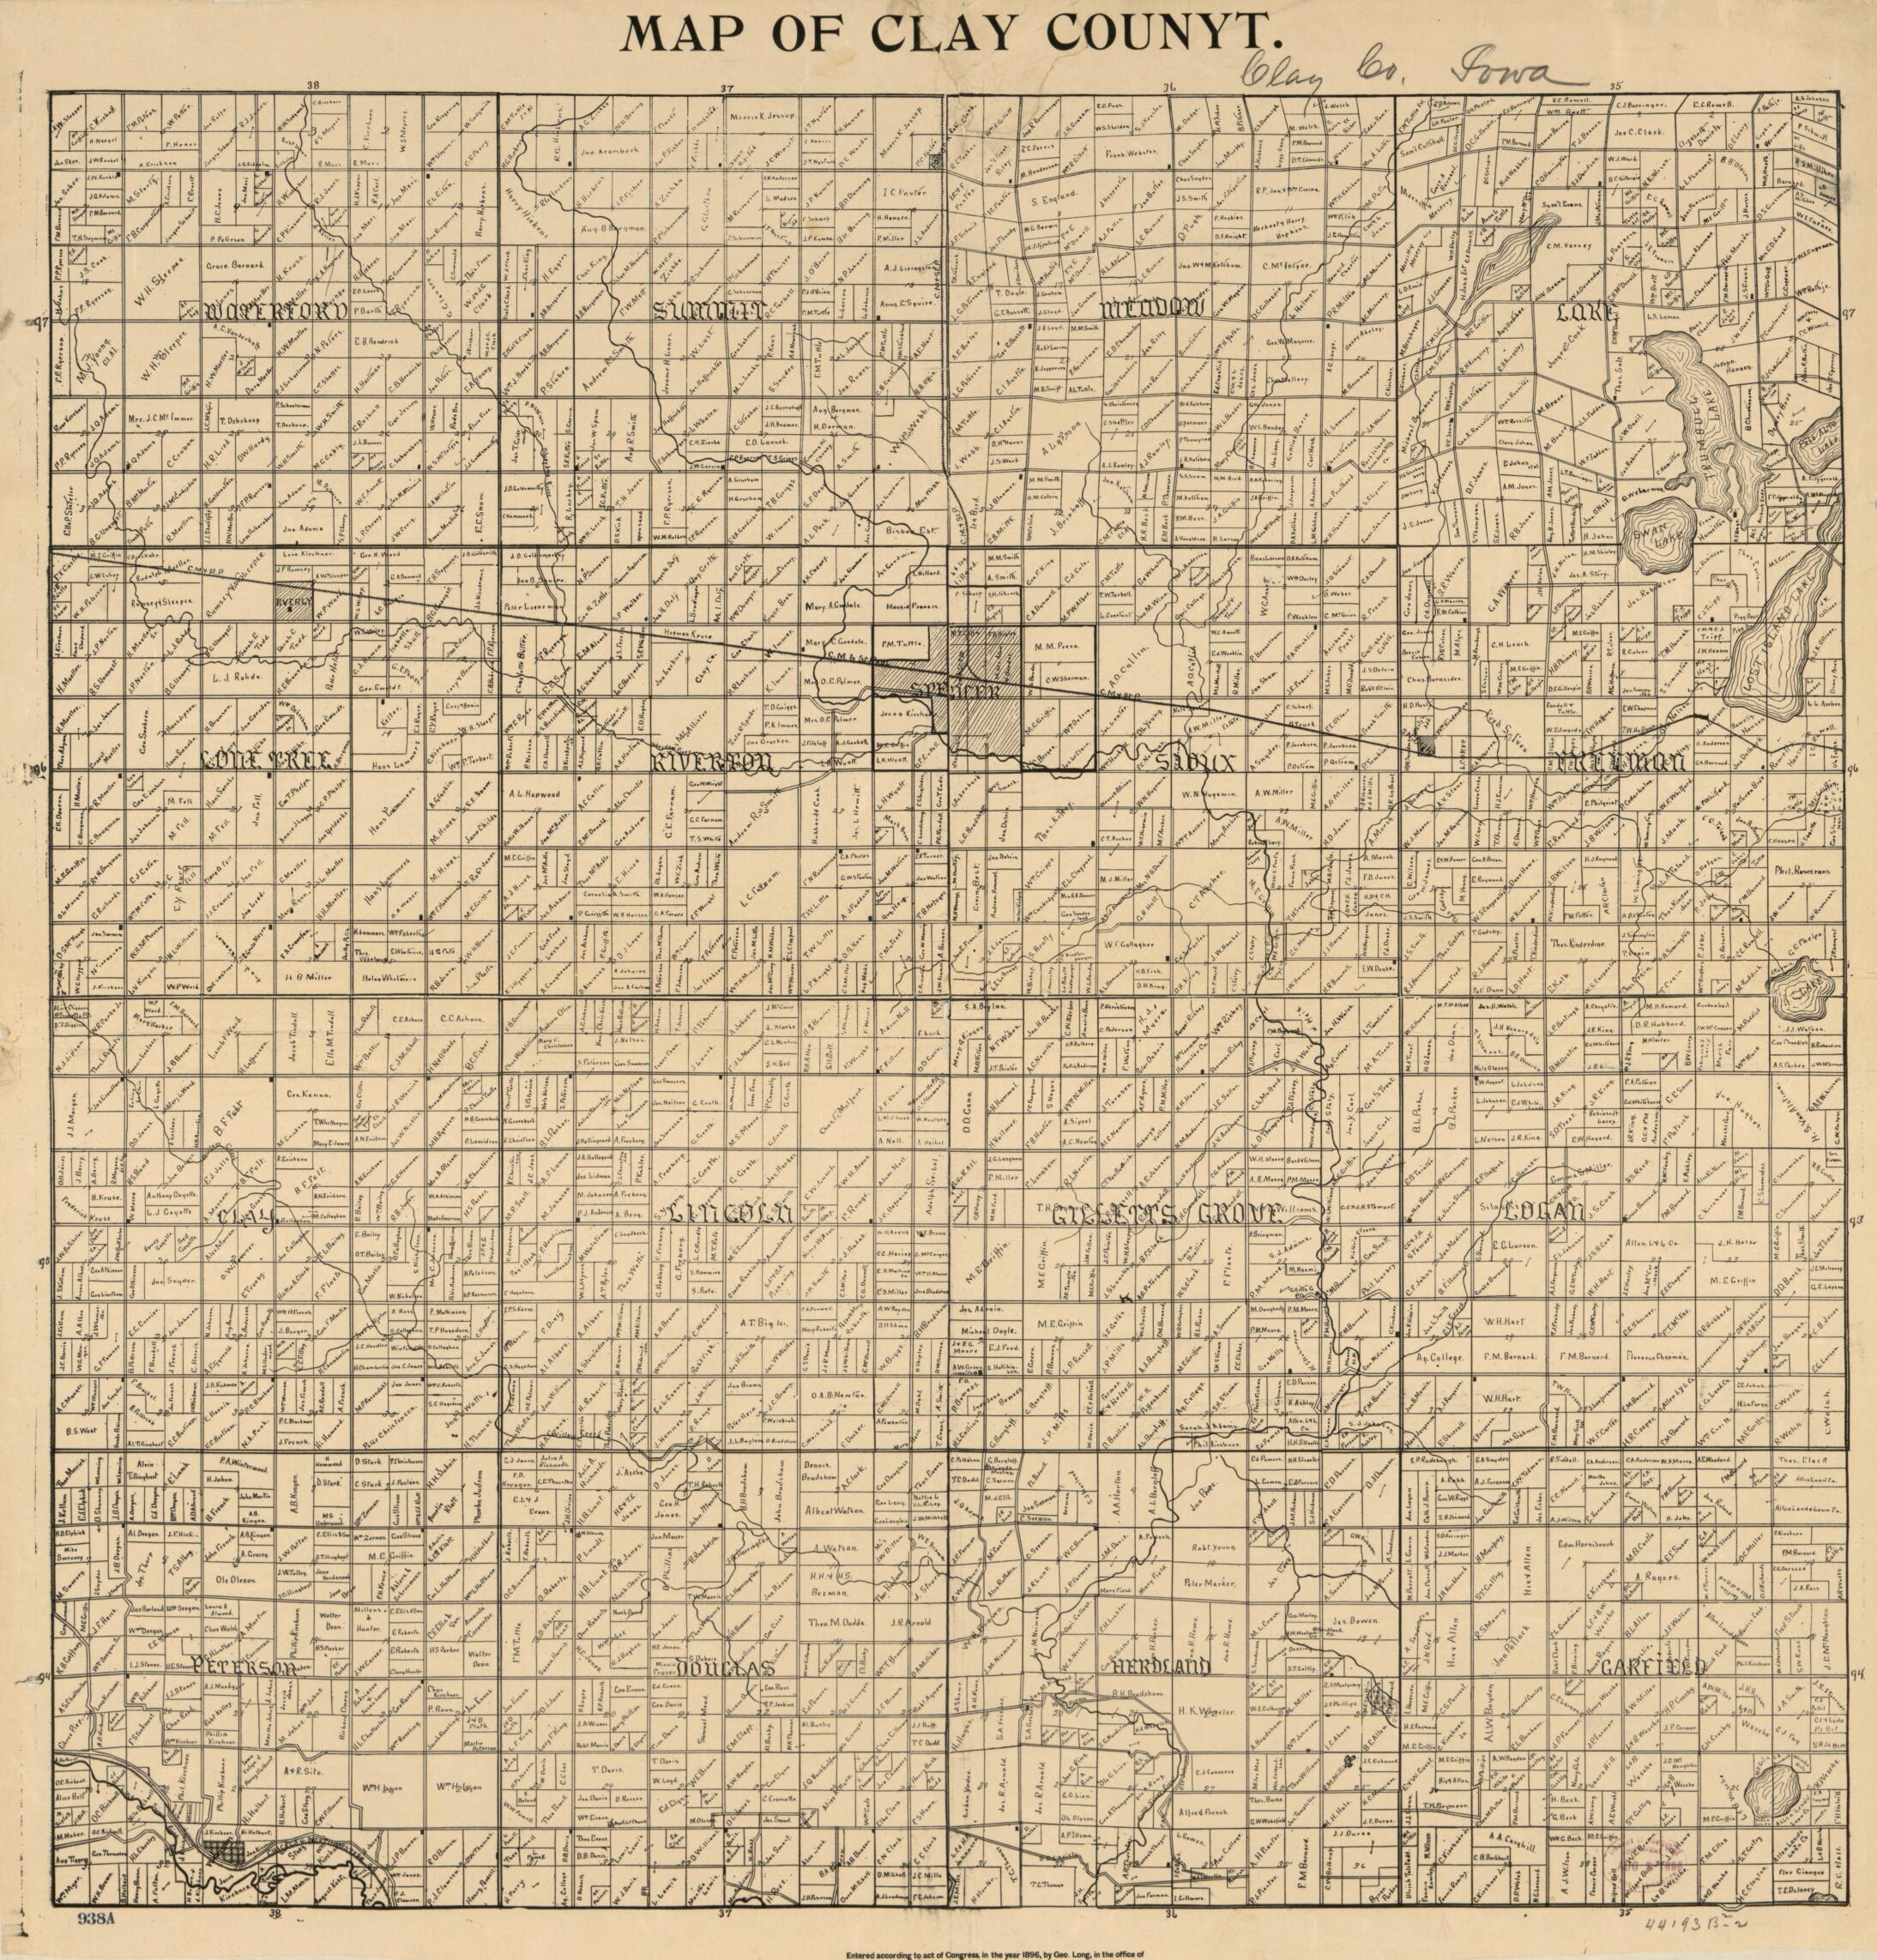 This old map of Map of Clay Counyt. (Map of Clay County) from 1896 was created by Geo Long in 1896